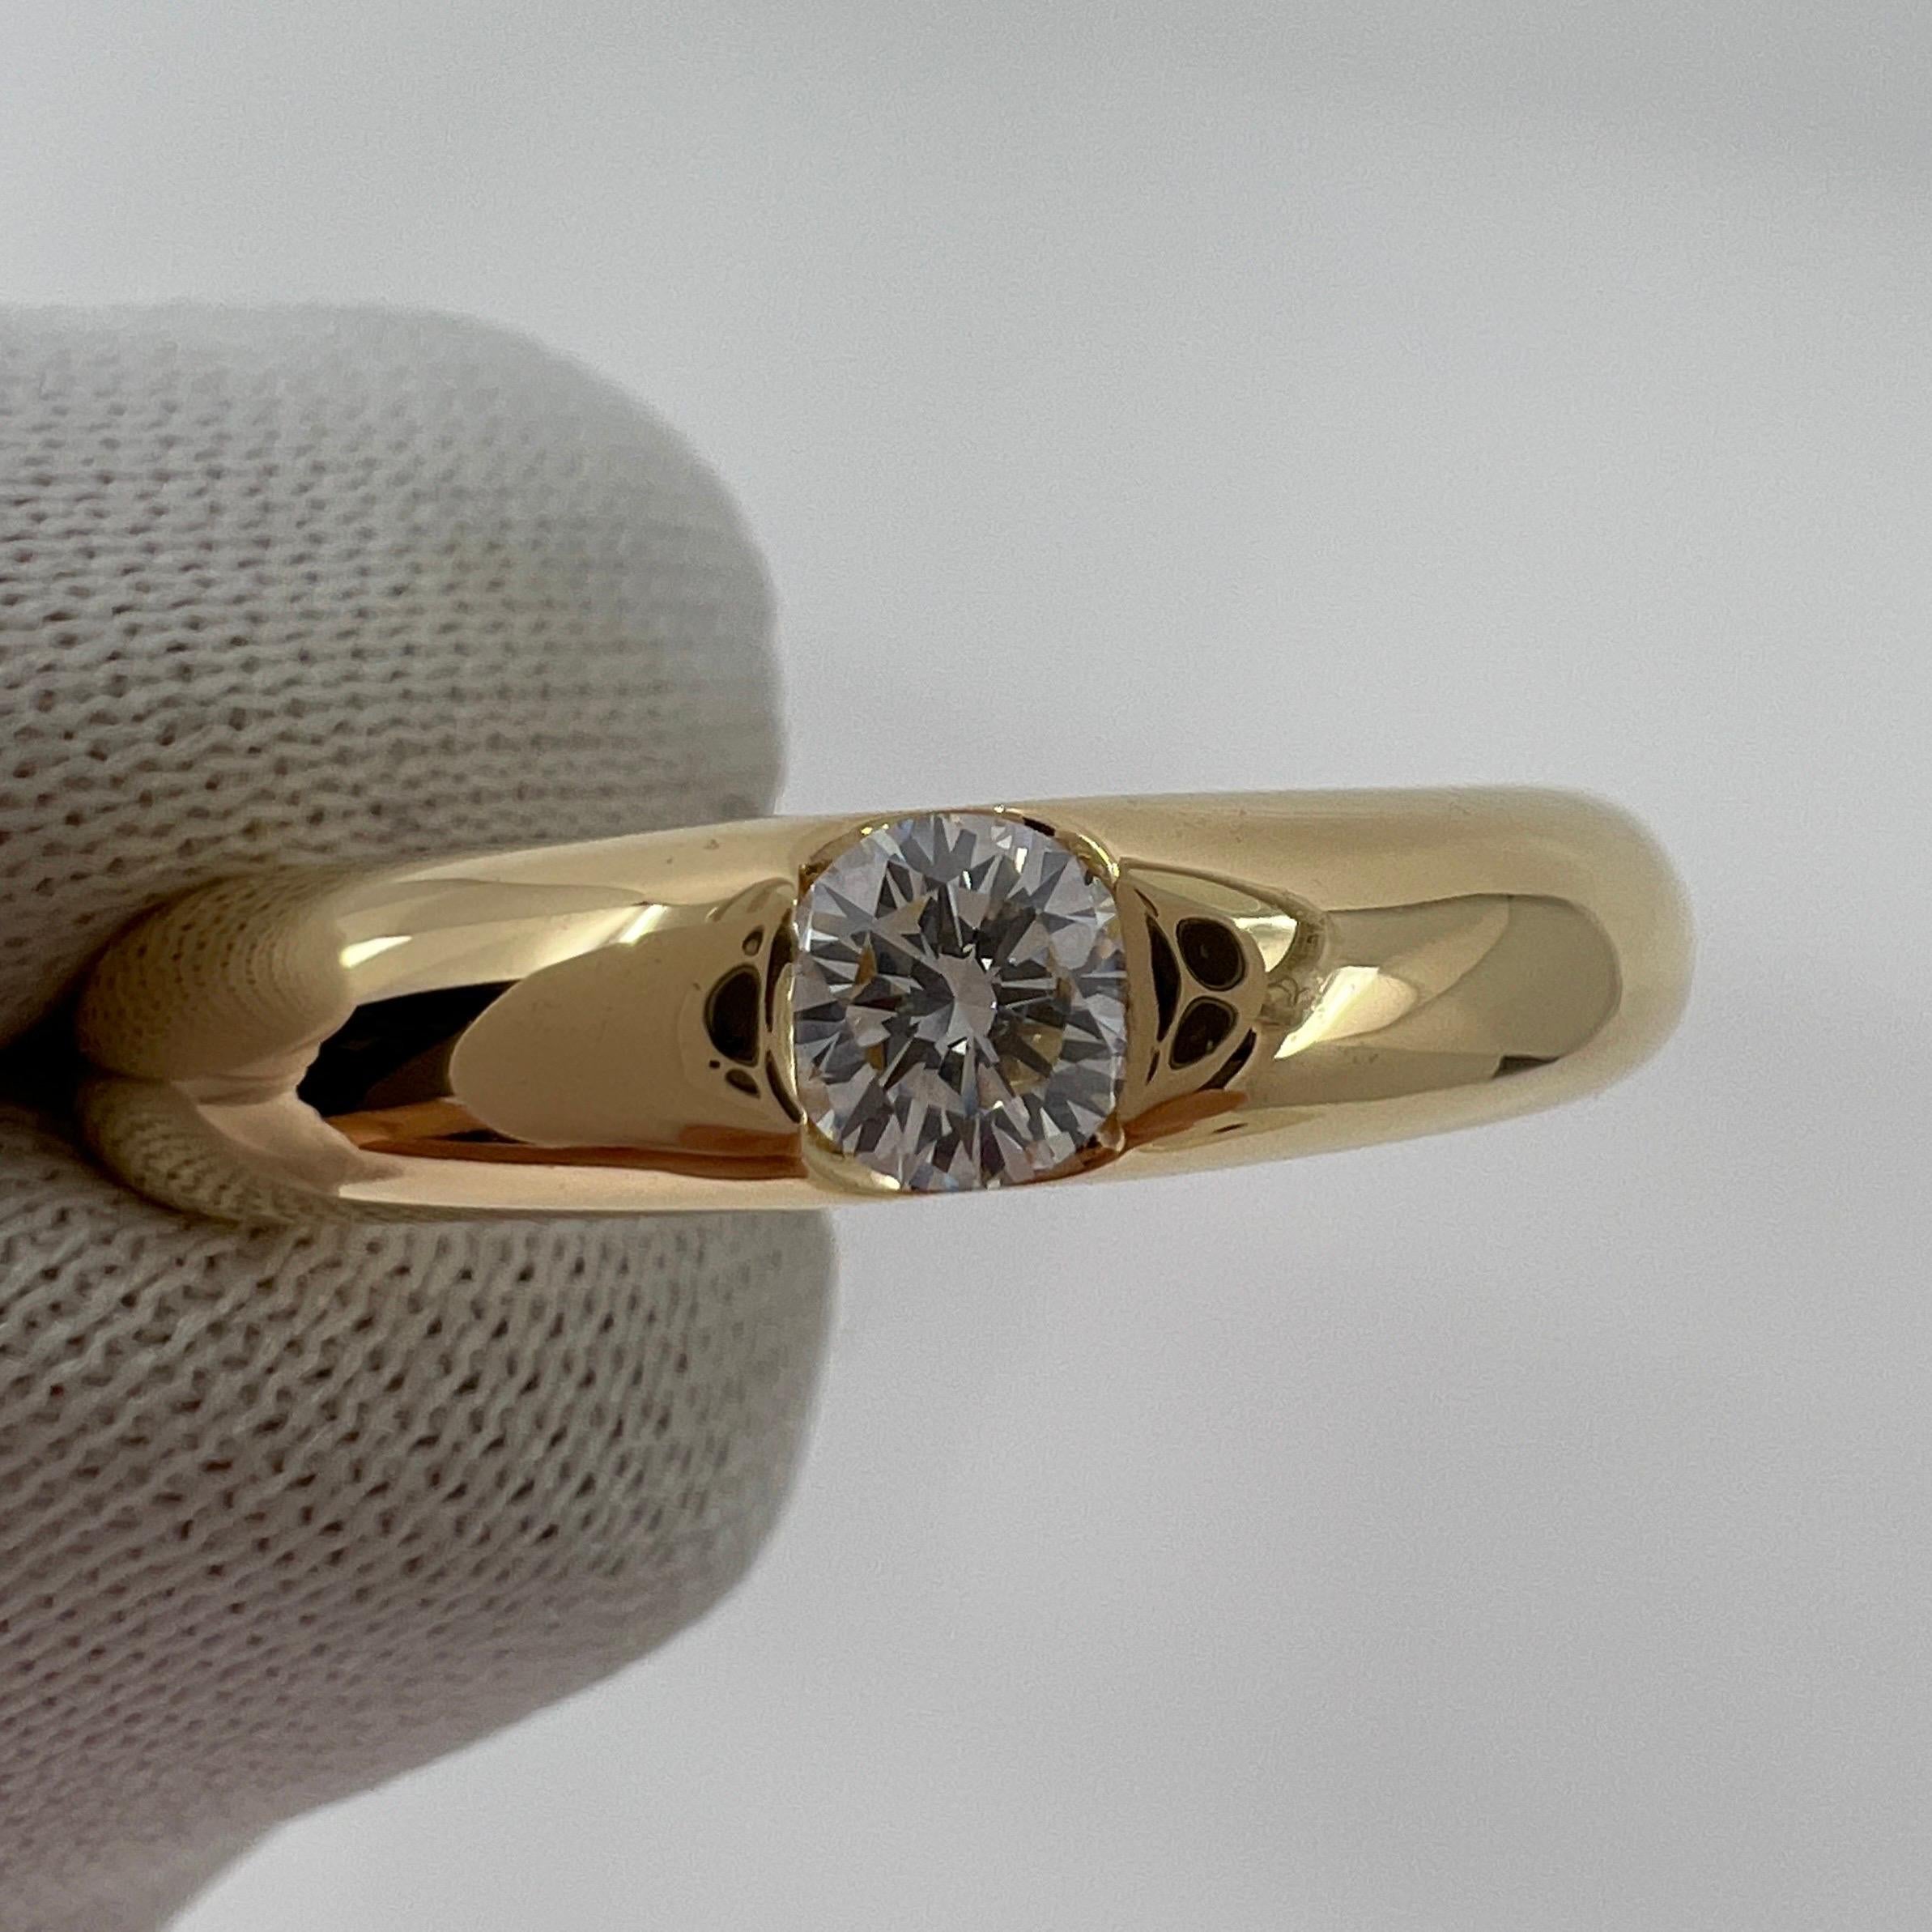 Vintage Cartier Round Brilliant Diamond 18k Yellow Gold Solitaire Ring.

Stunning yellow gold ring set with a fine 0.25ct round diamond. E colour VVS clarity with an excellent round brilliant cut. Fine jewellery houses like Cartier only use the